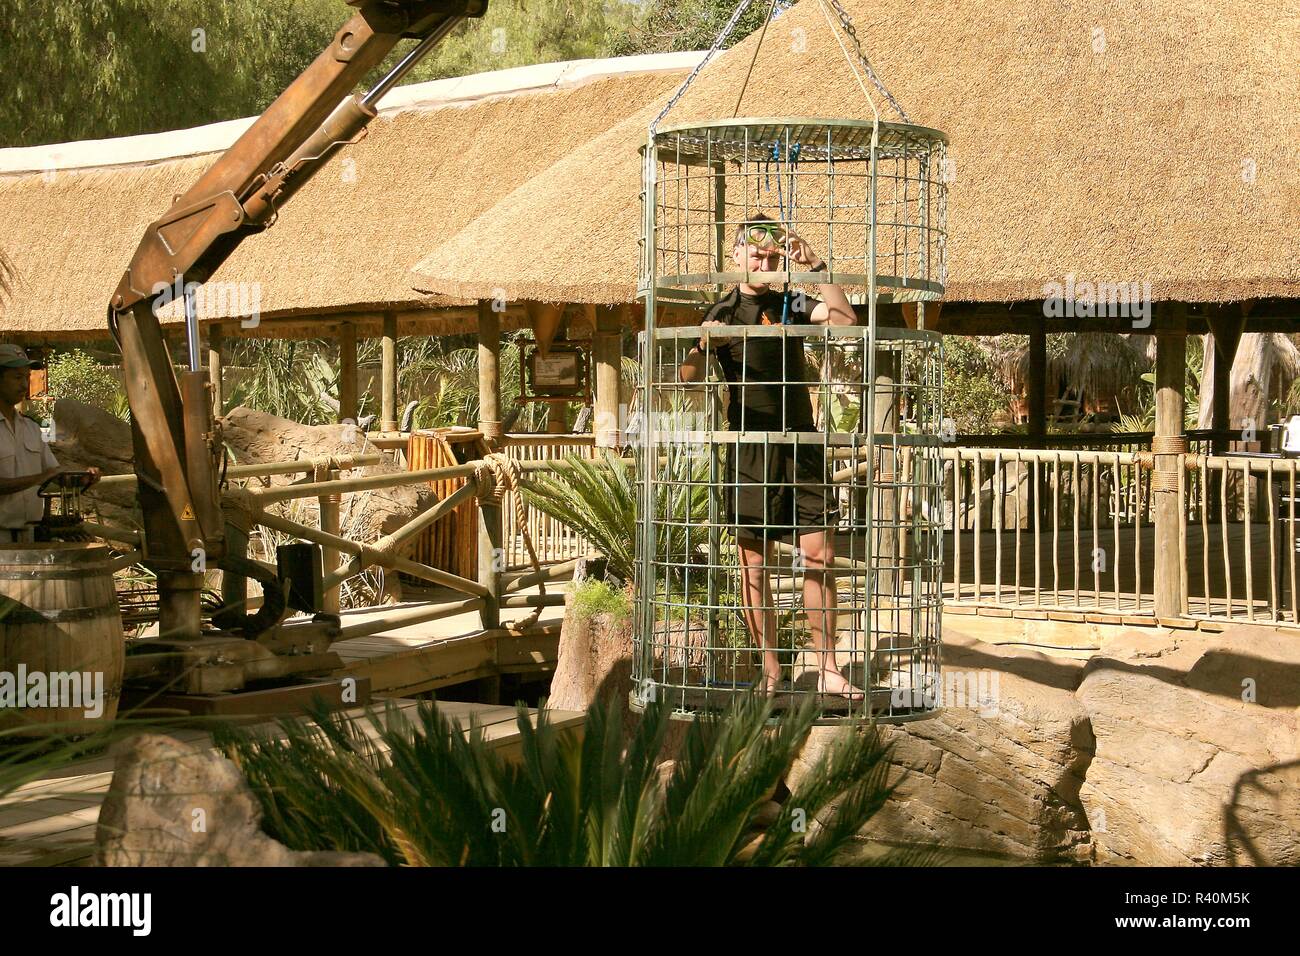 Crocodile, cage, diving, oudtshoorn, south africa Stock Photo